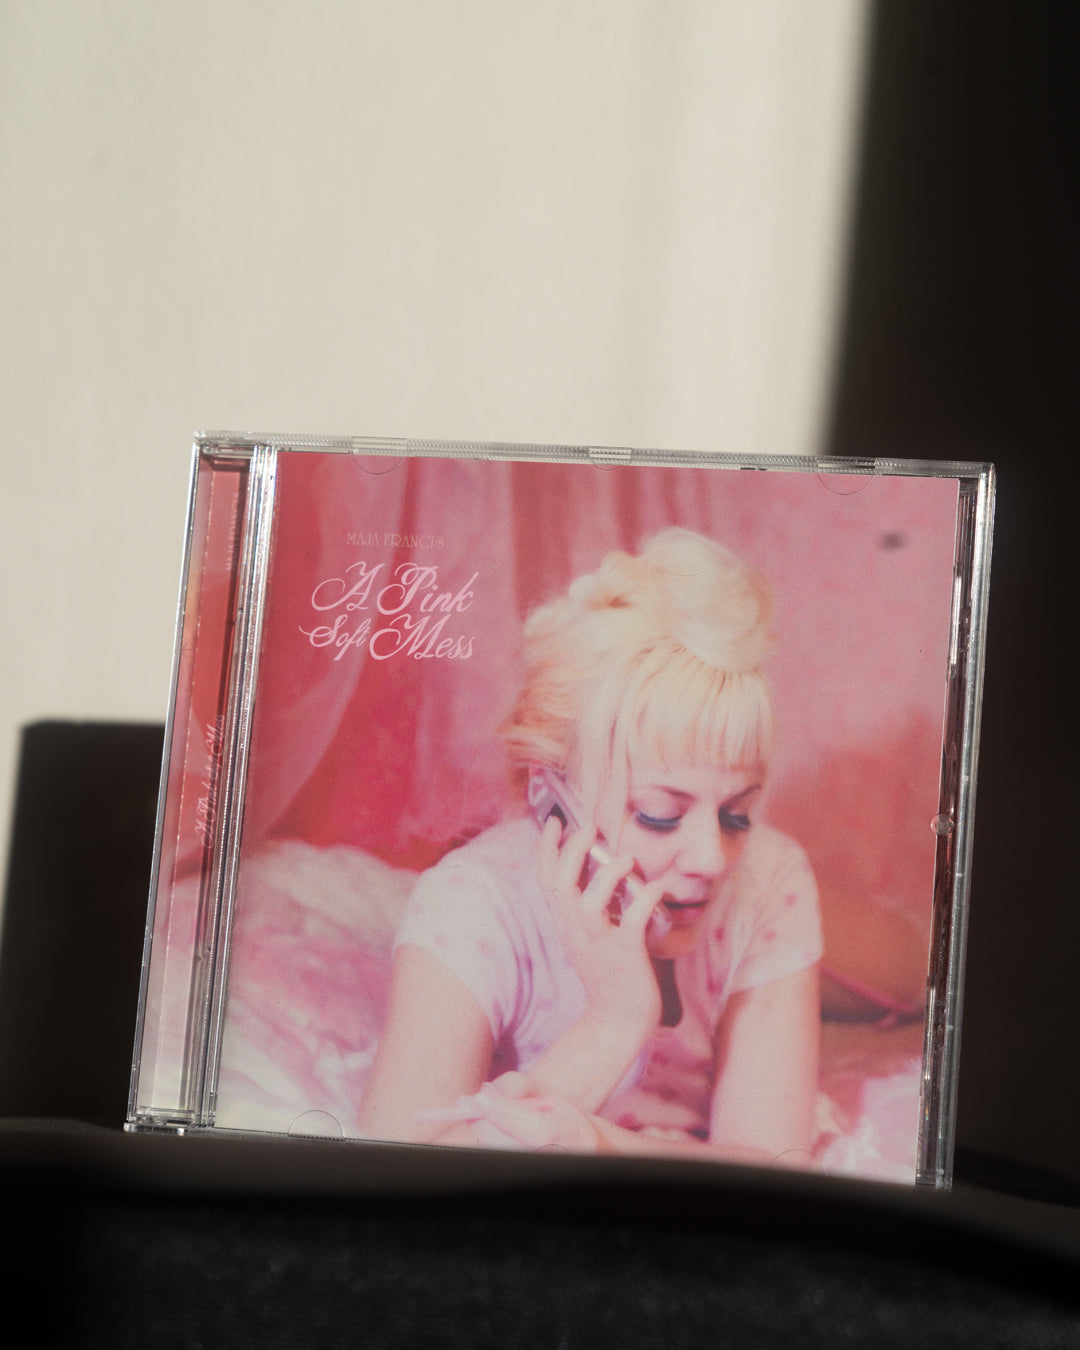 Maja Francis - A Pink Soft Mess (CD Deluxe Edt.)